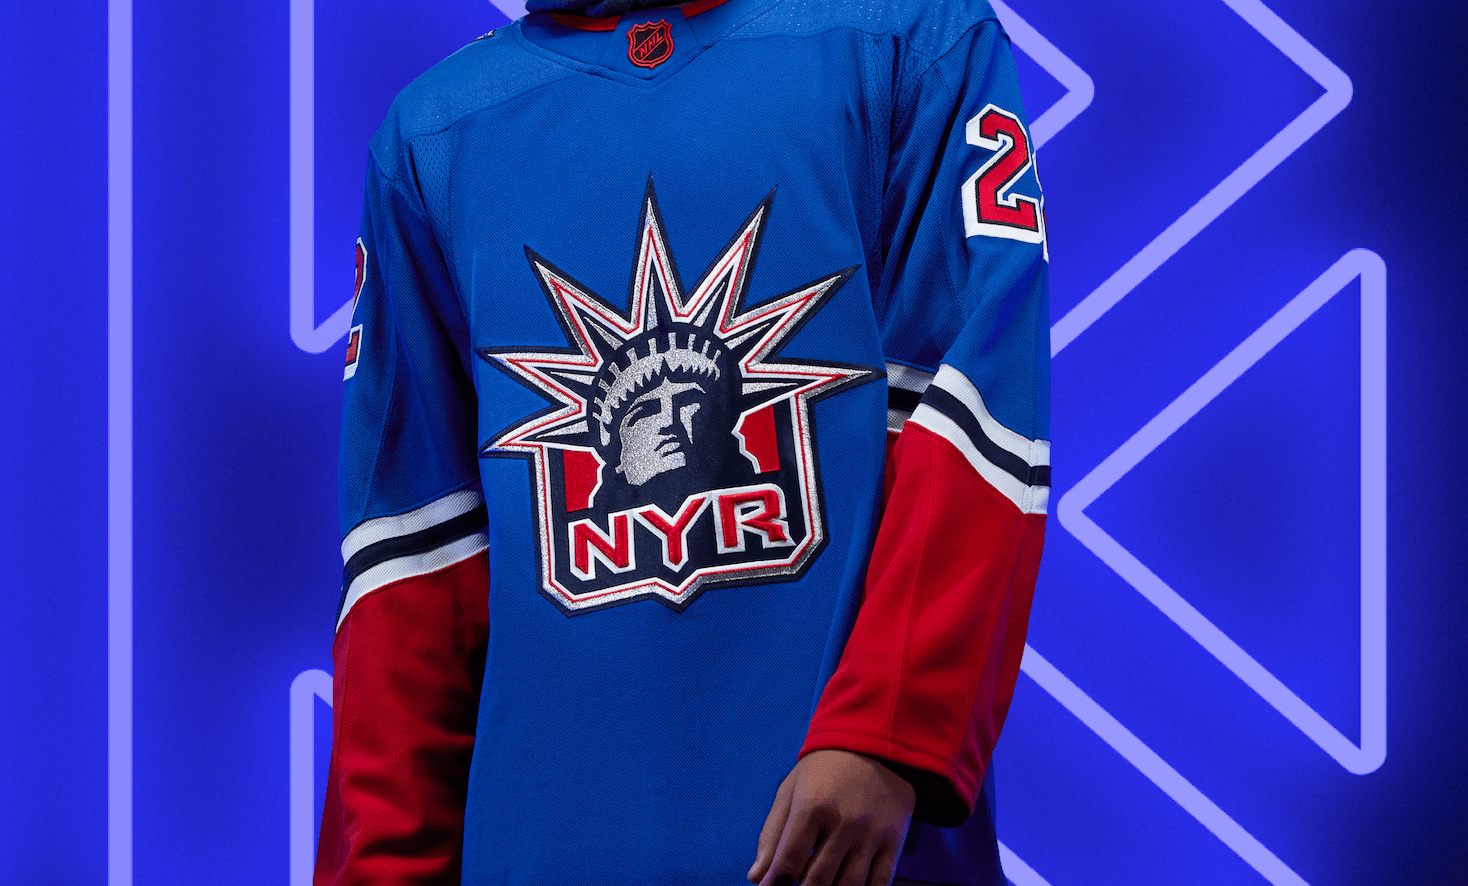 NHL on X: 🗣 We've got another #ReverseRetro debut! This gorgeous